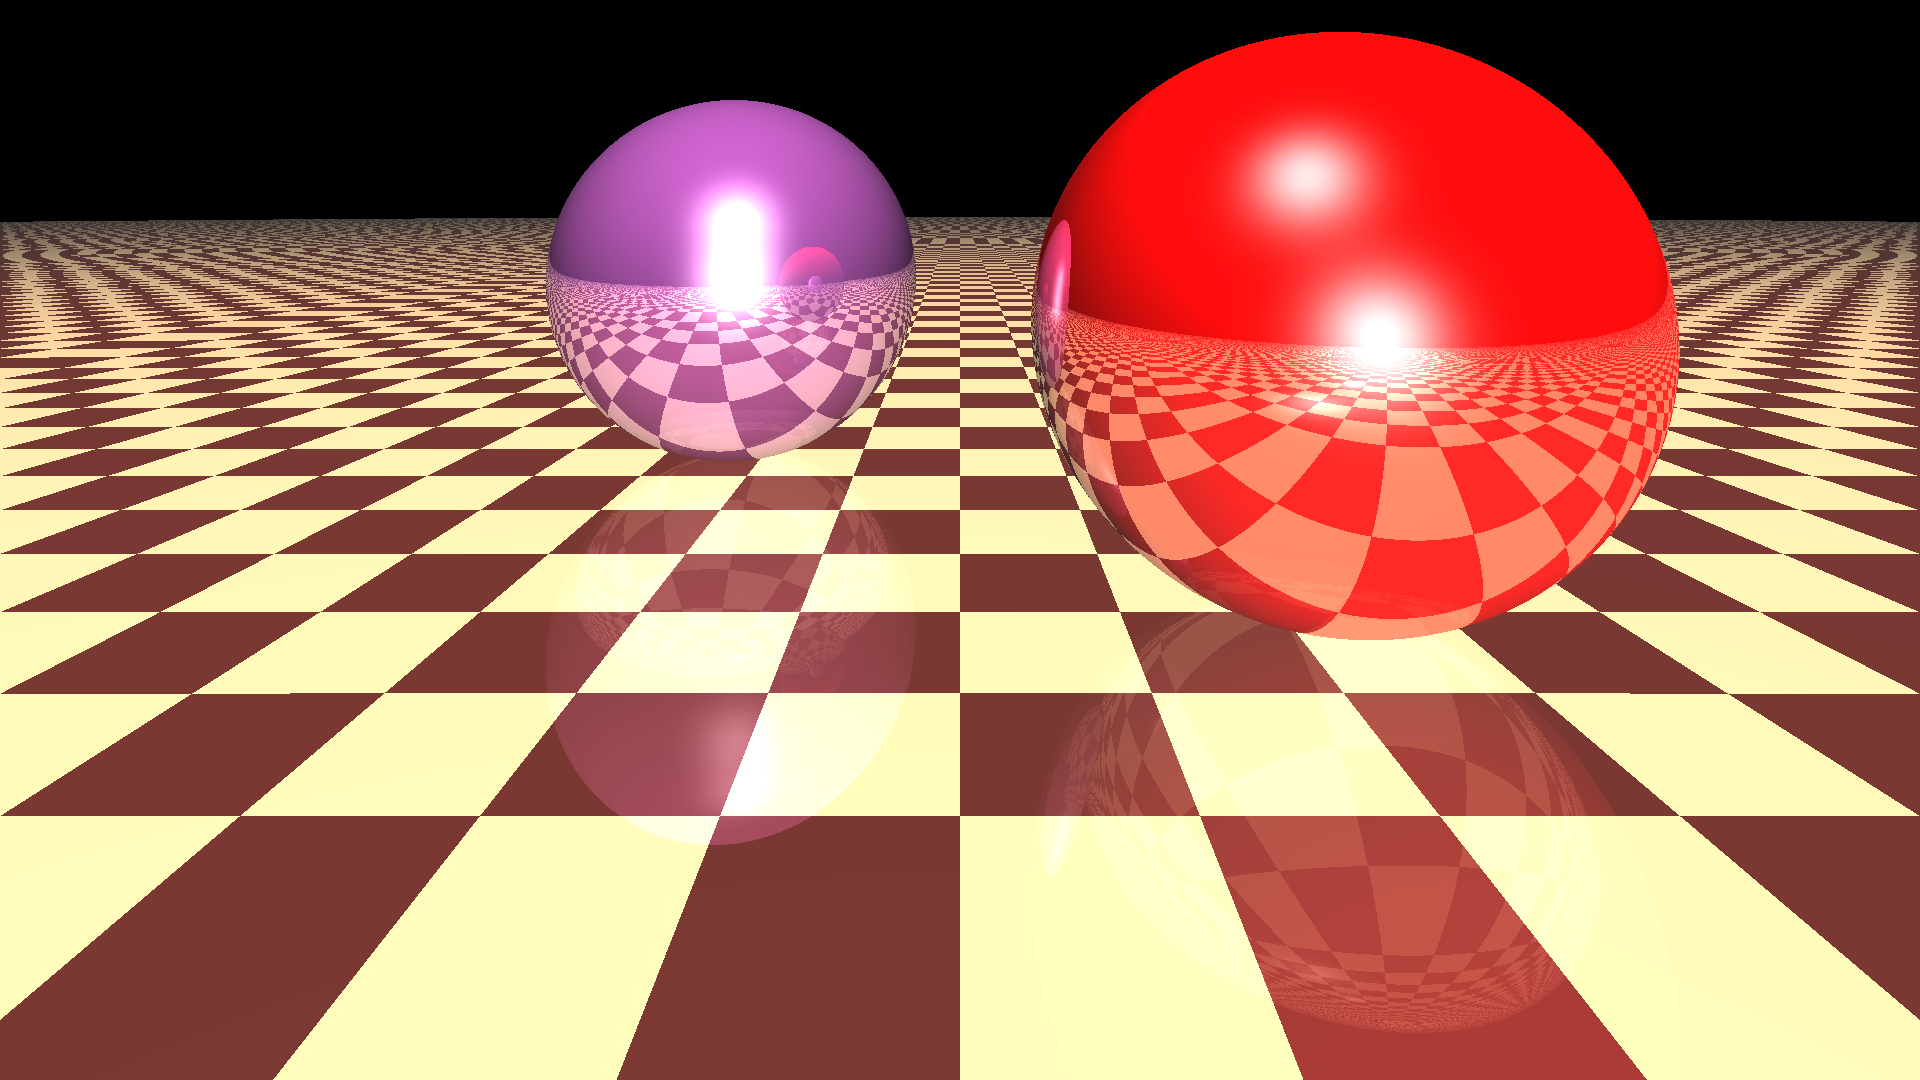 Render of two balls